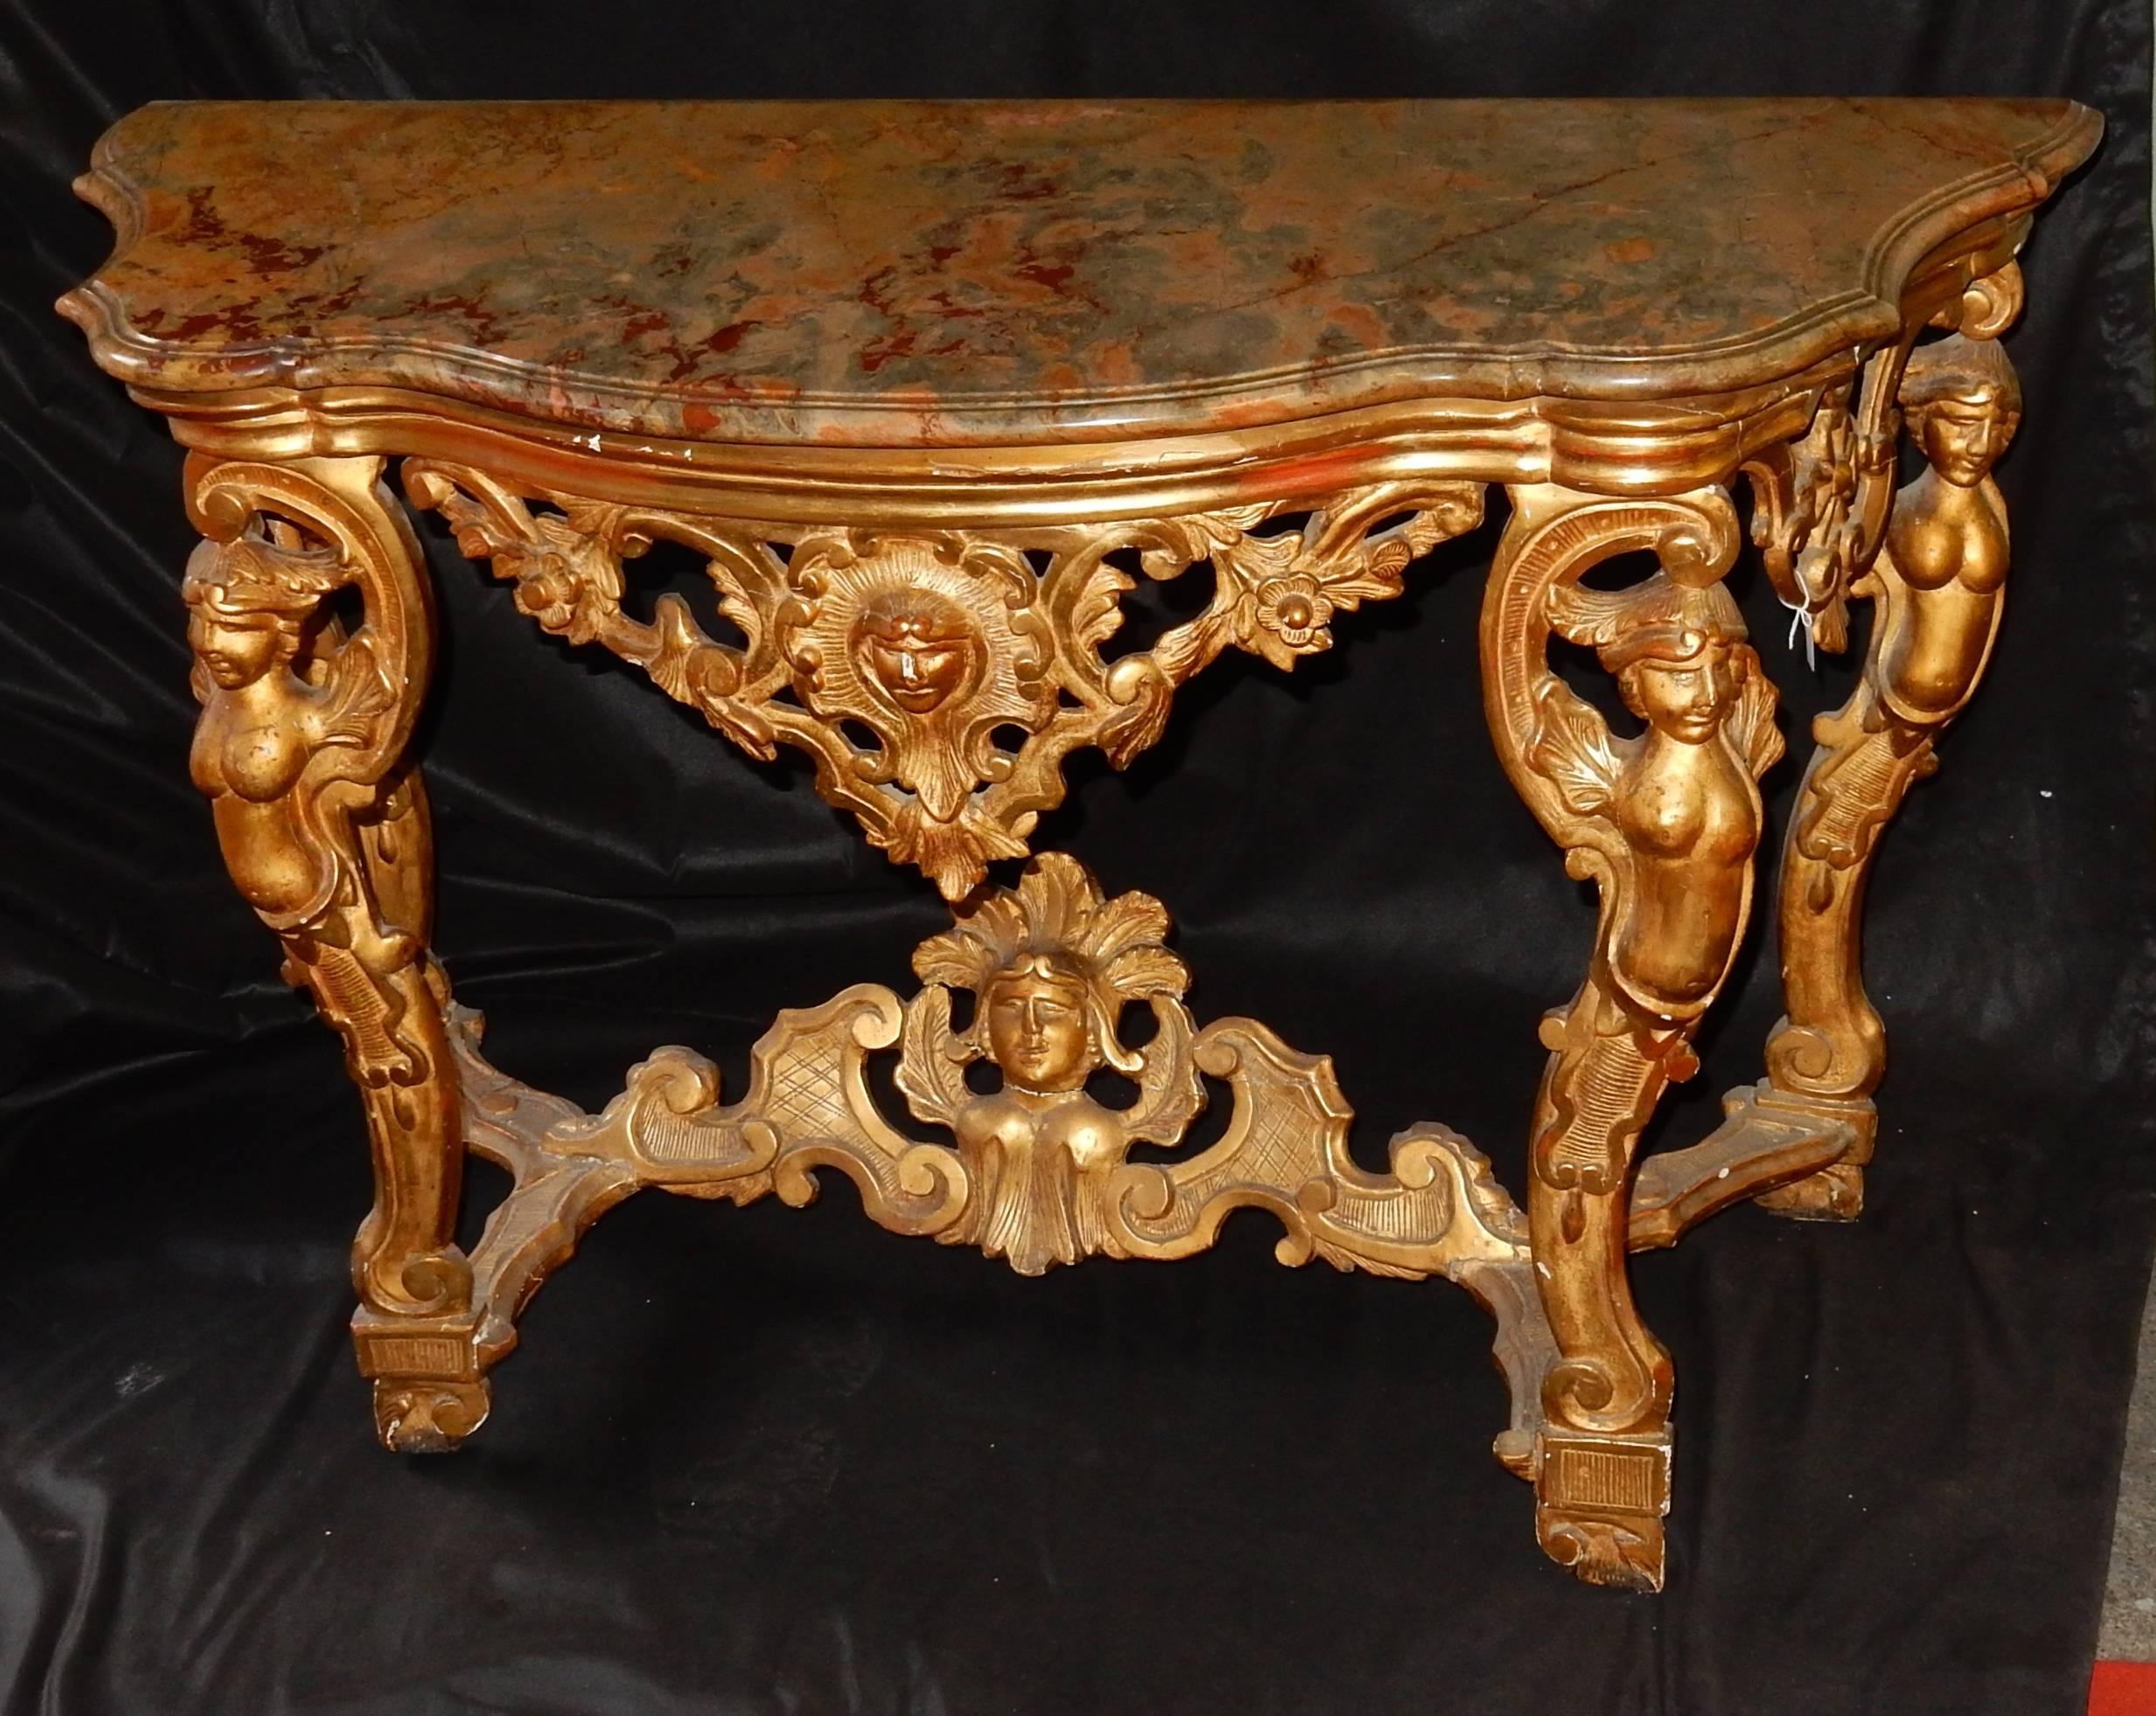 Italian console four feet with characters trains arbaléte, marble with beak corbin, gilt with gold, condition of use, plan a restoration.